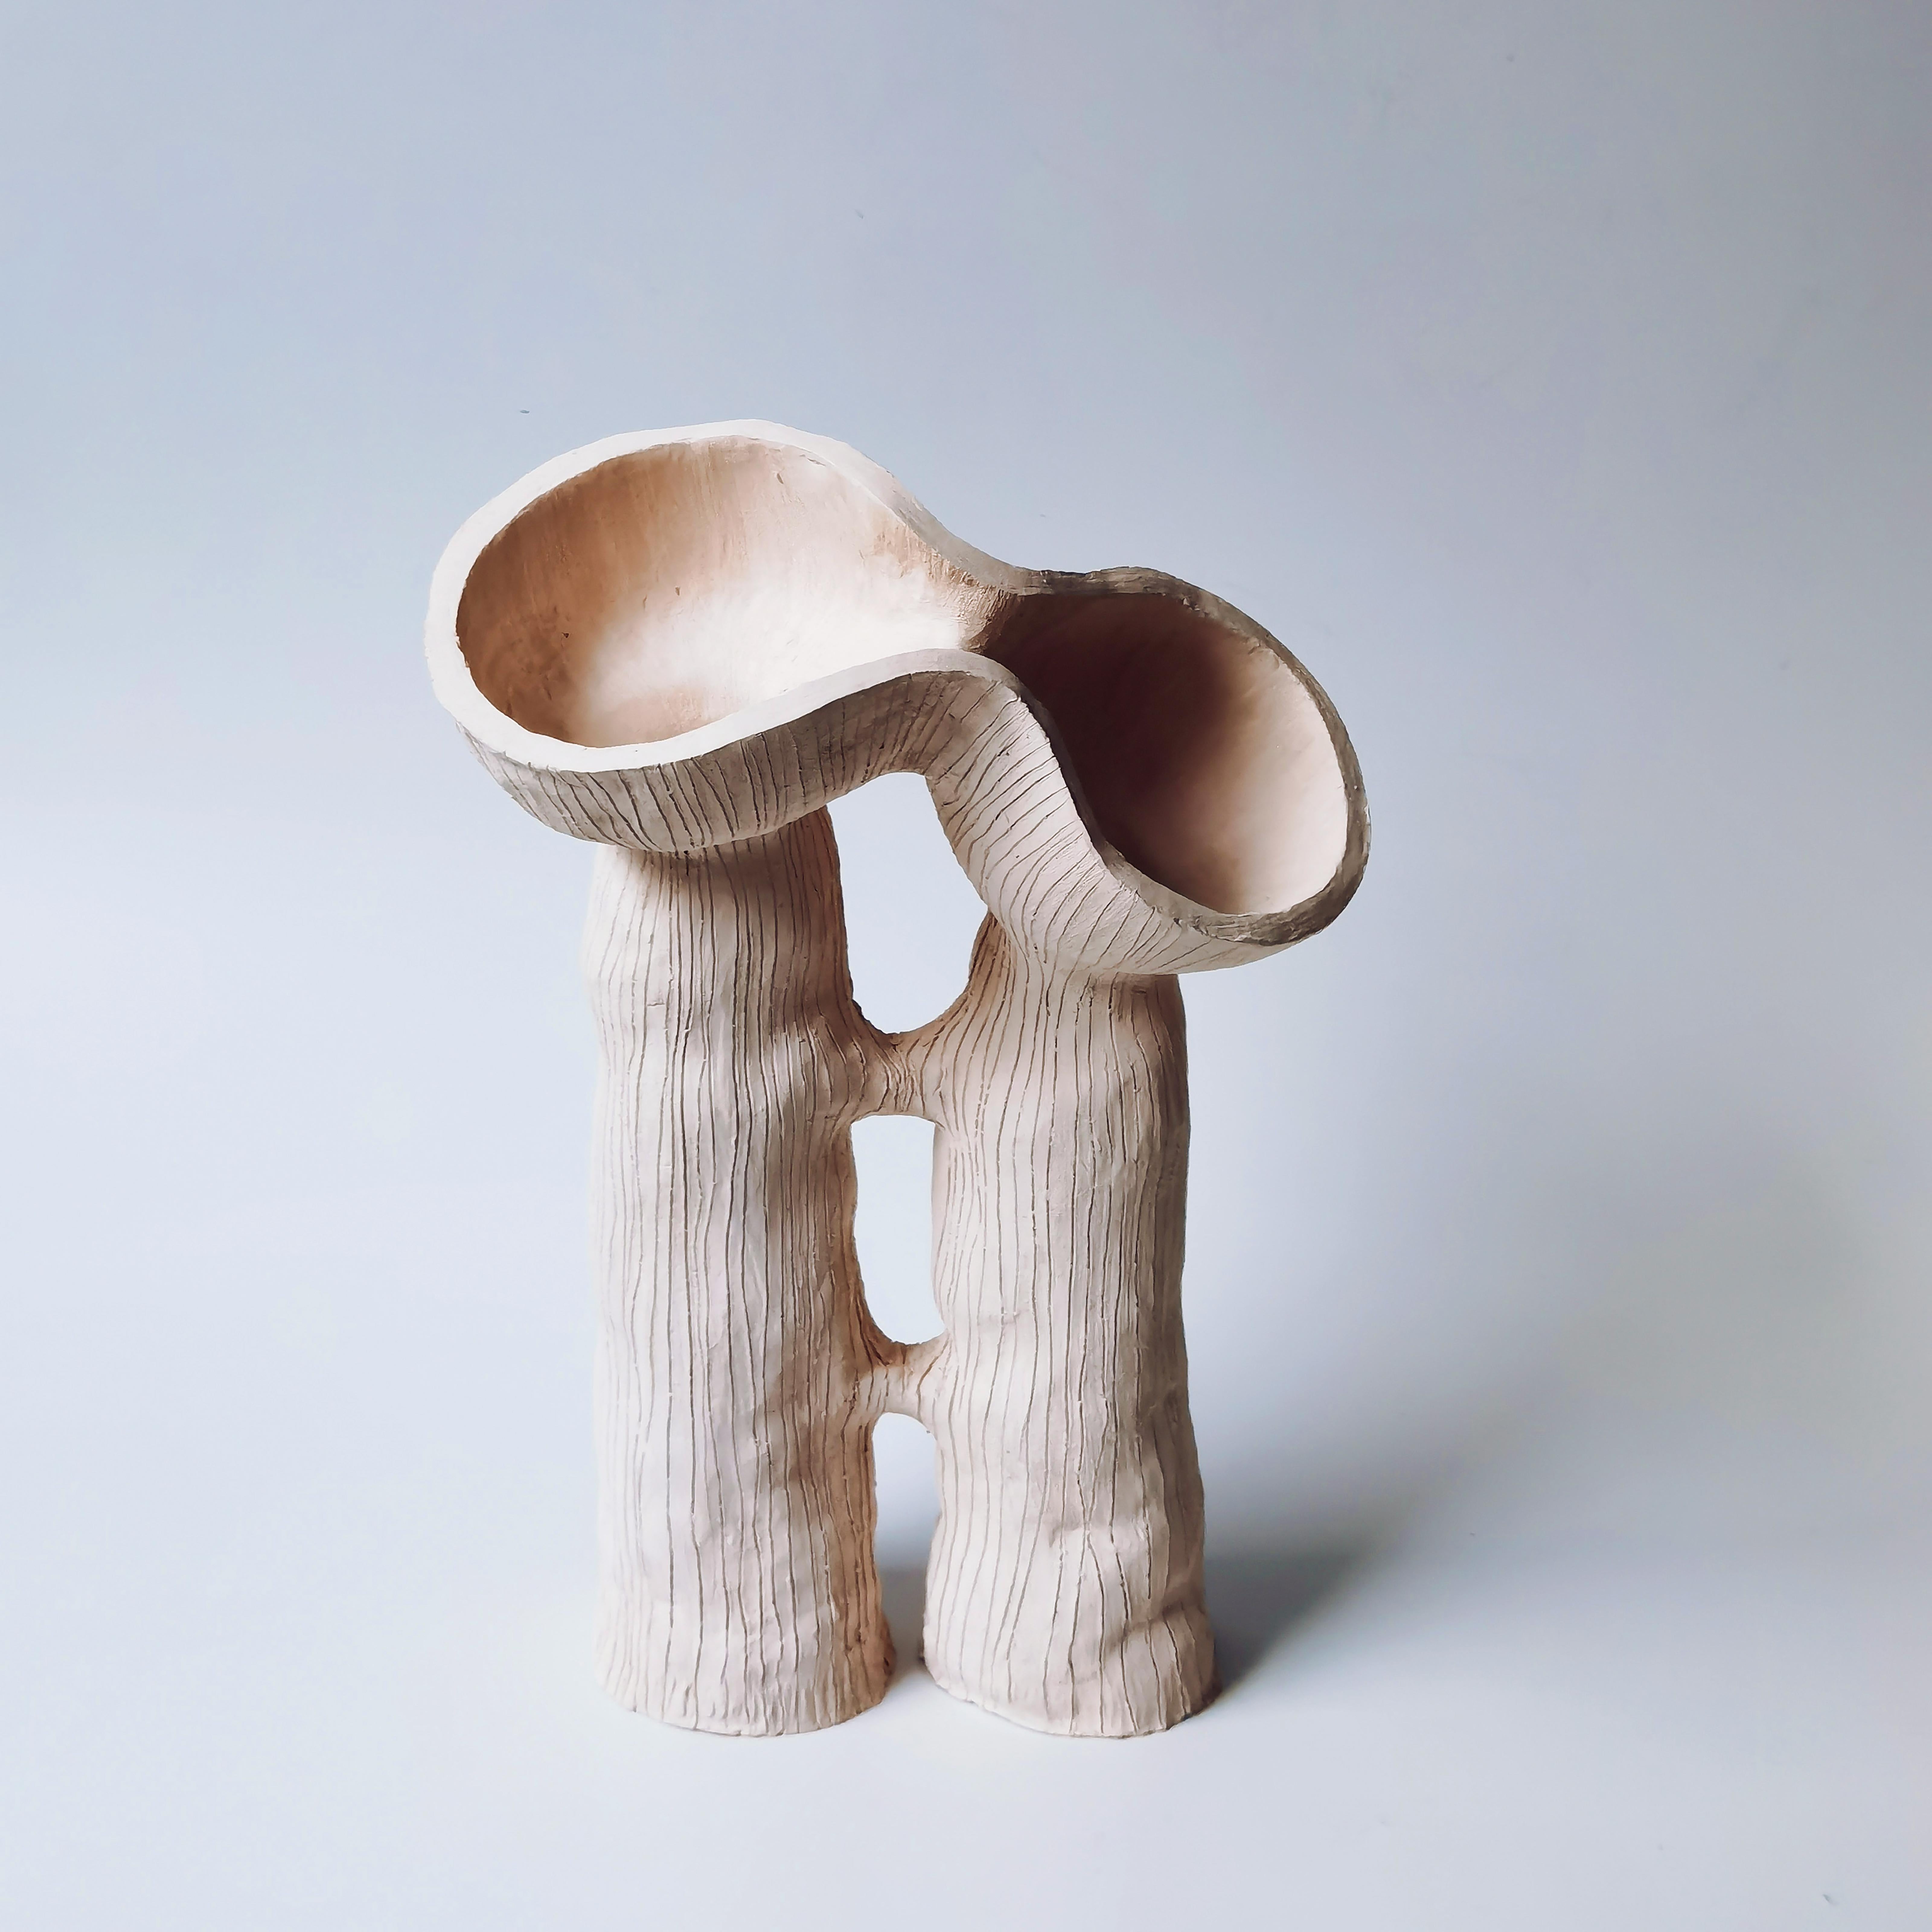 Two Pod, Two Stem by Jan Ernst
Dimensions: H 35 cm
Materials: White Stoneware

Jan Ernst’s work takes on an experimental approach, as he prefers making bespoke pieces by hand. His organic design stems from his
abstract understanding of form and